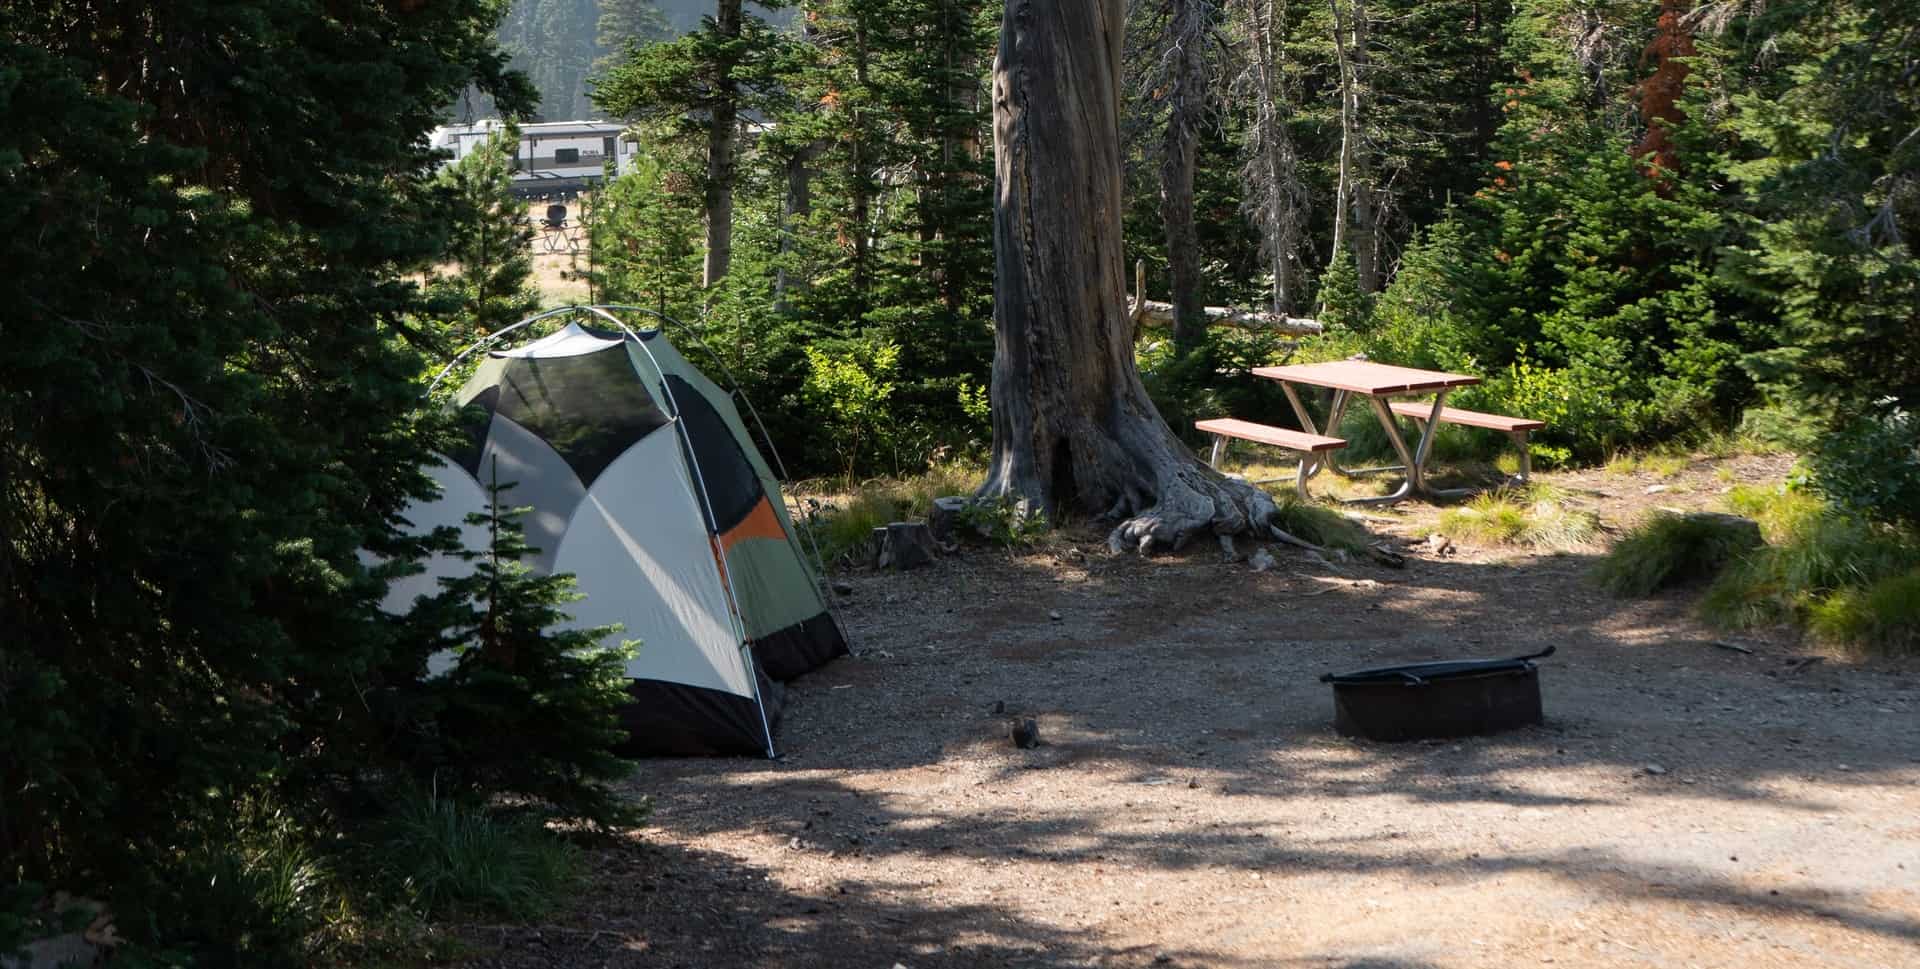 Tent in a camping area next to a picnic table at a campsite.